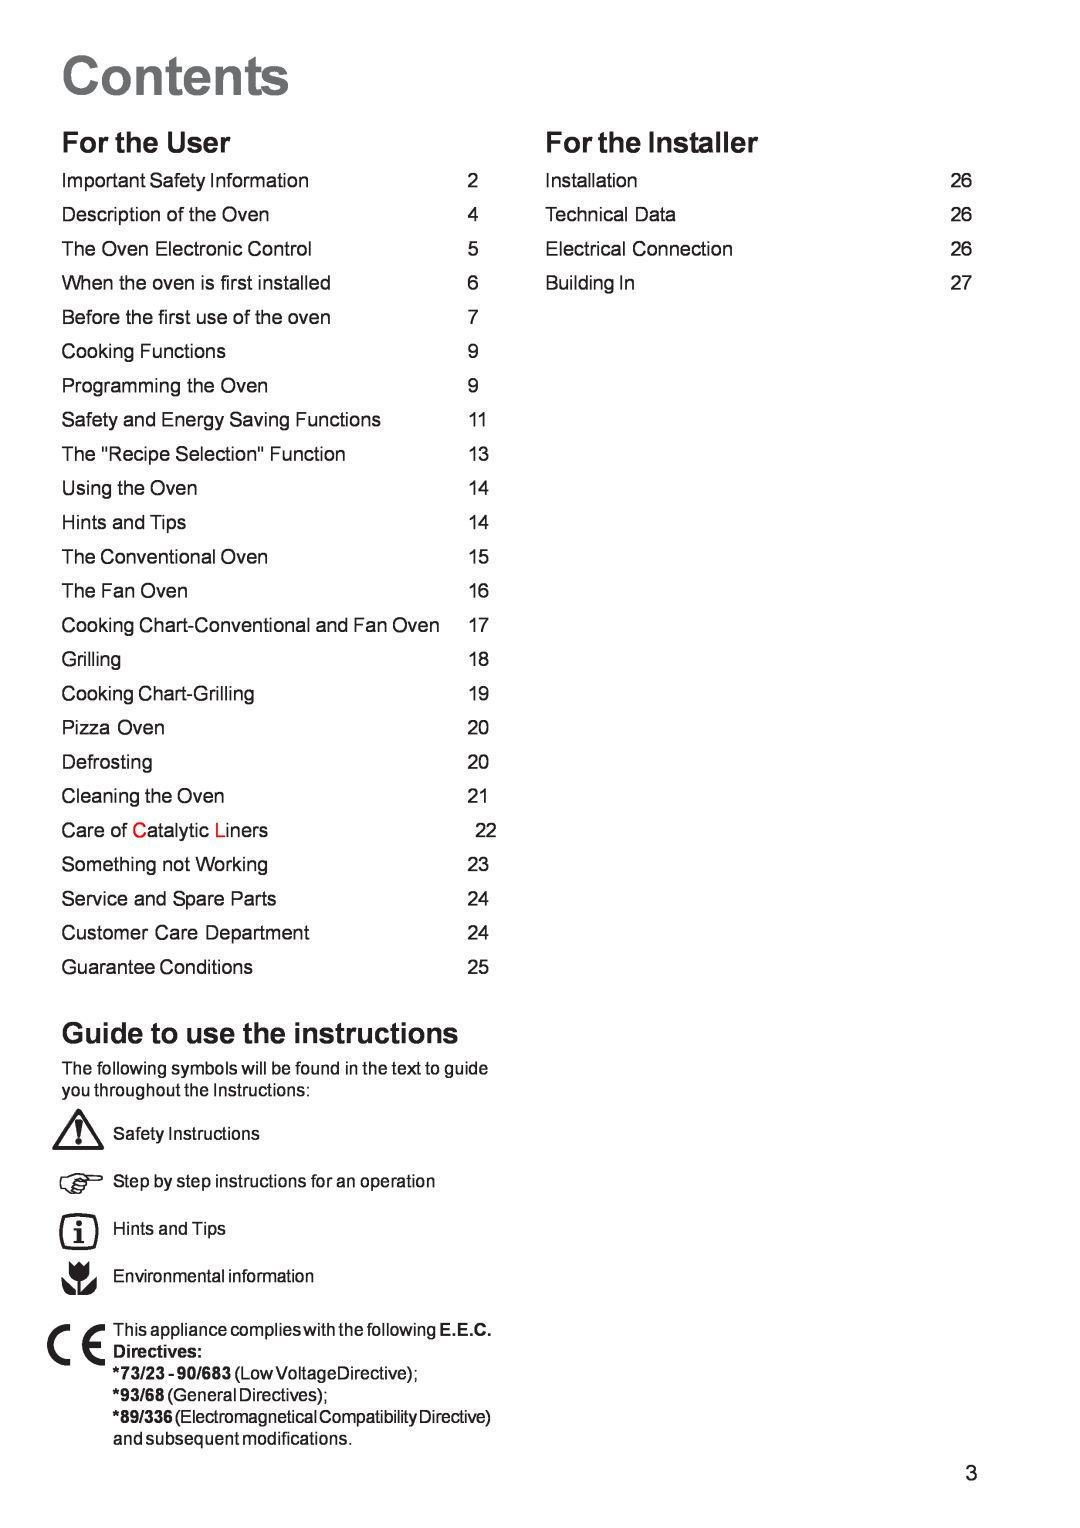 Zanussi ZBS 1063 manual Contents, For the User, For the Installer, Guide to use the instructions 